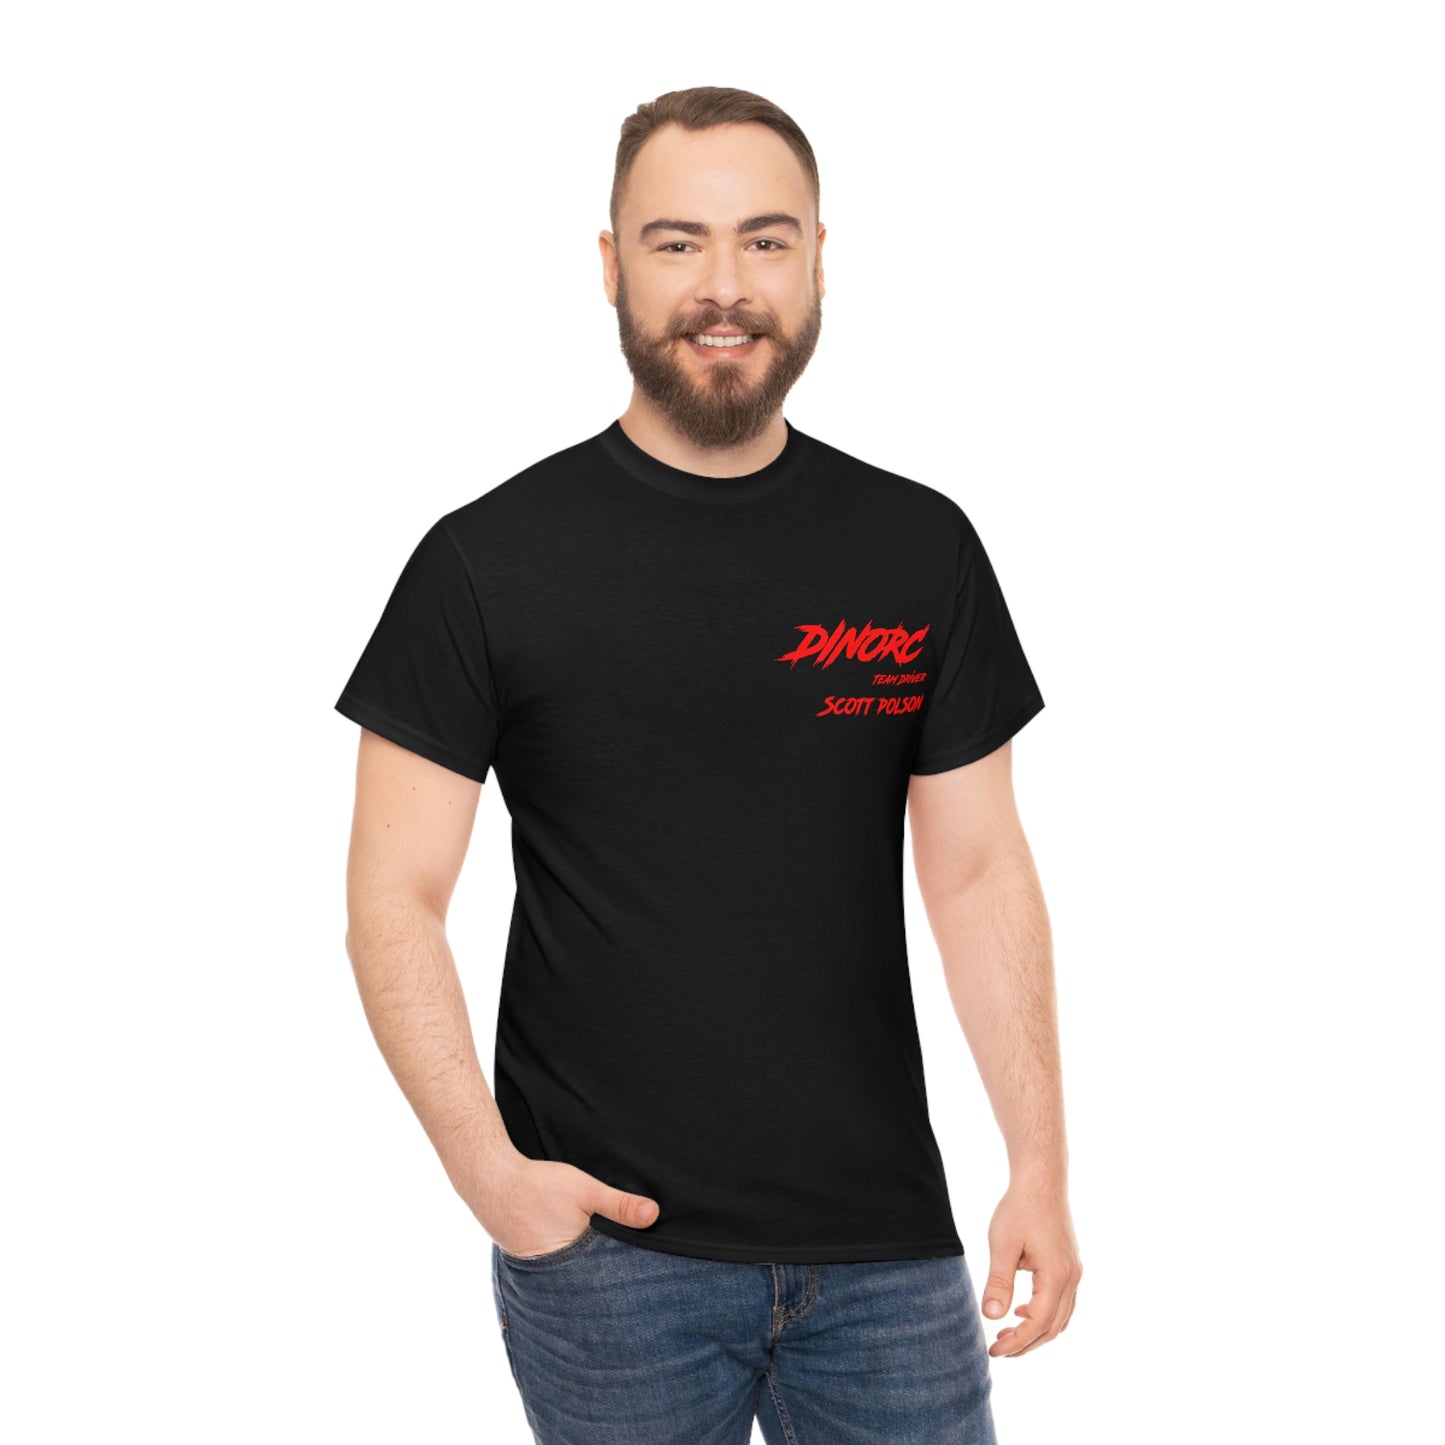 Team Driver Scott Polson Front and Back DinoRc Logo T-Shirt S-5x 5 colors